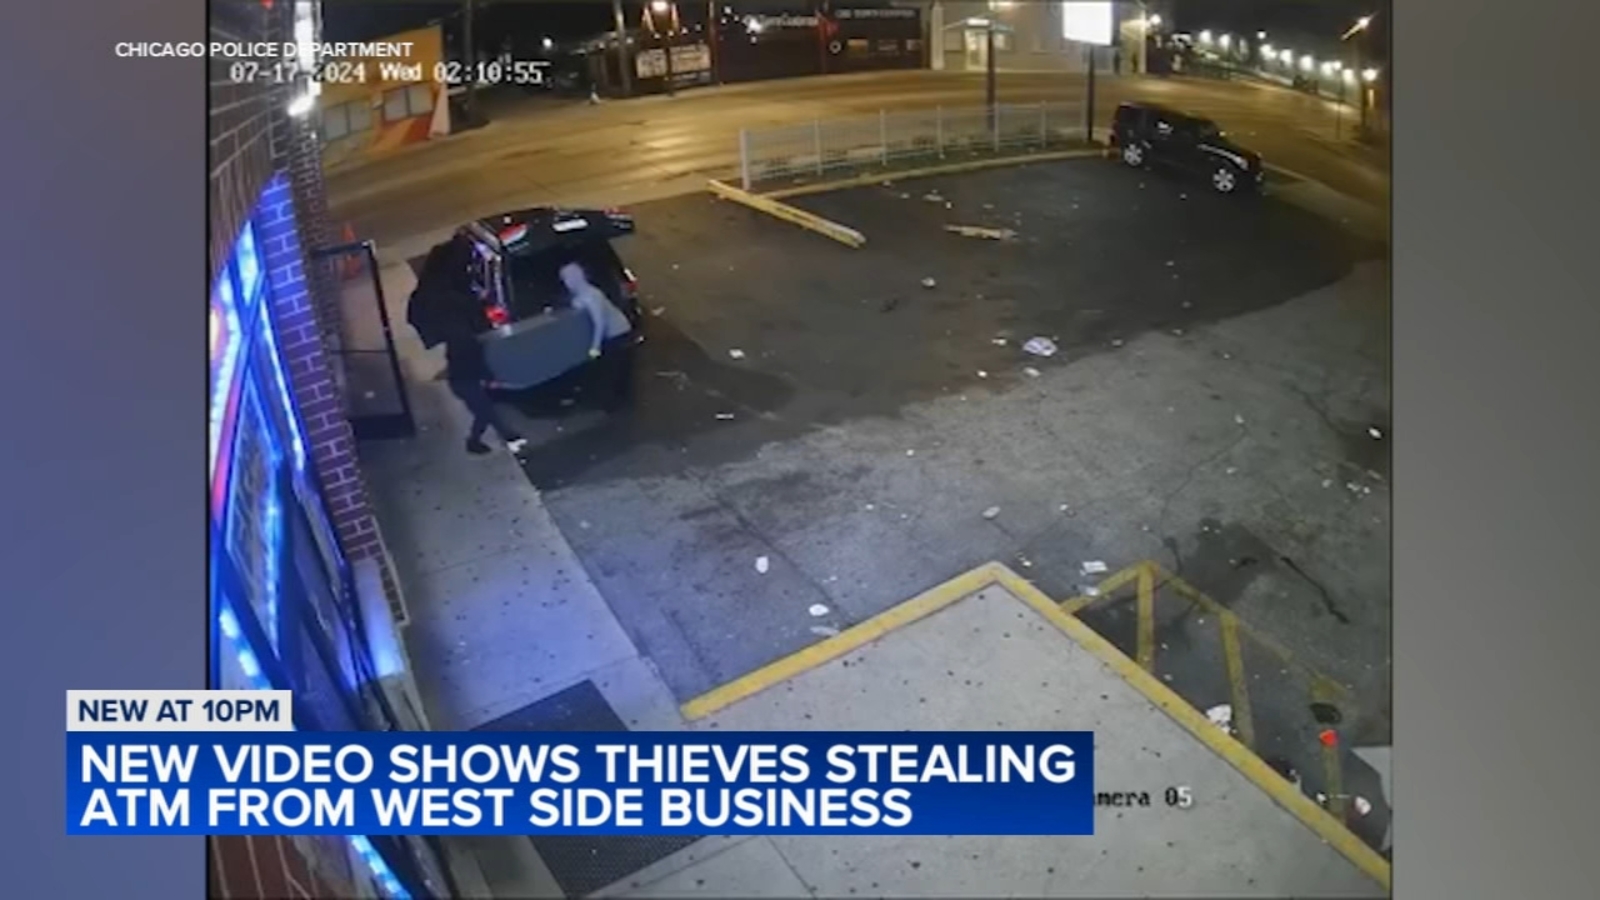 Chicago crime: Police issue warning after recent smash-and-grab burglaries at West Side businesses in Austin, Garfield Park [Video]